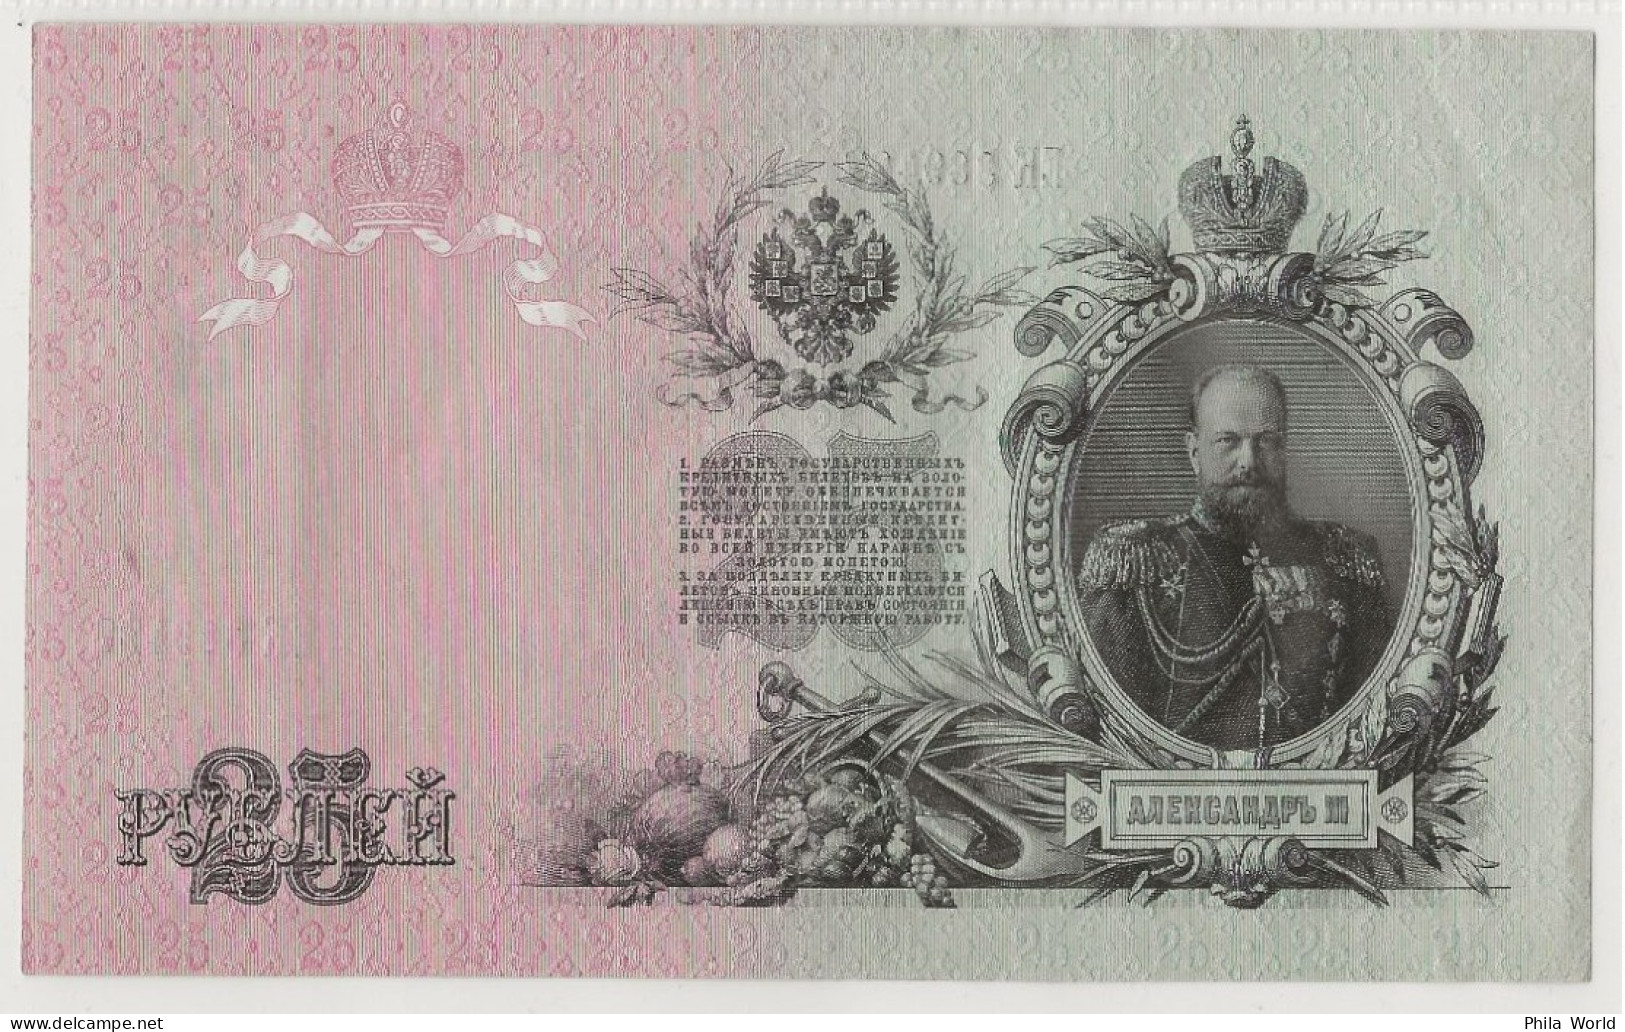 RUSSIE RUSSIA 25 ROUBLES Rubles Russian 1909 Billet Banque Bank Note Banknote Alexandre Alexander III Shipov Gusev - Russia